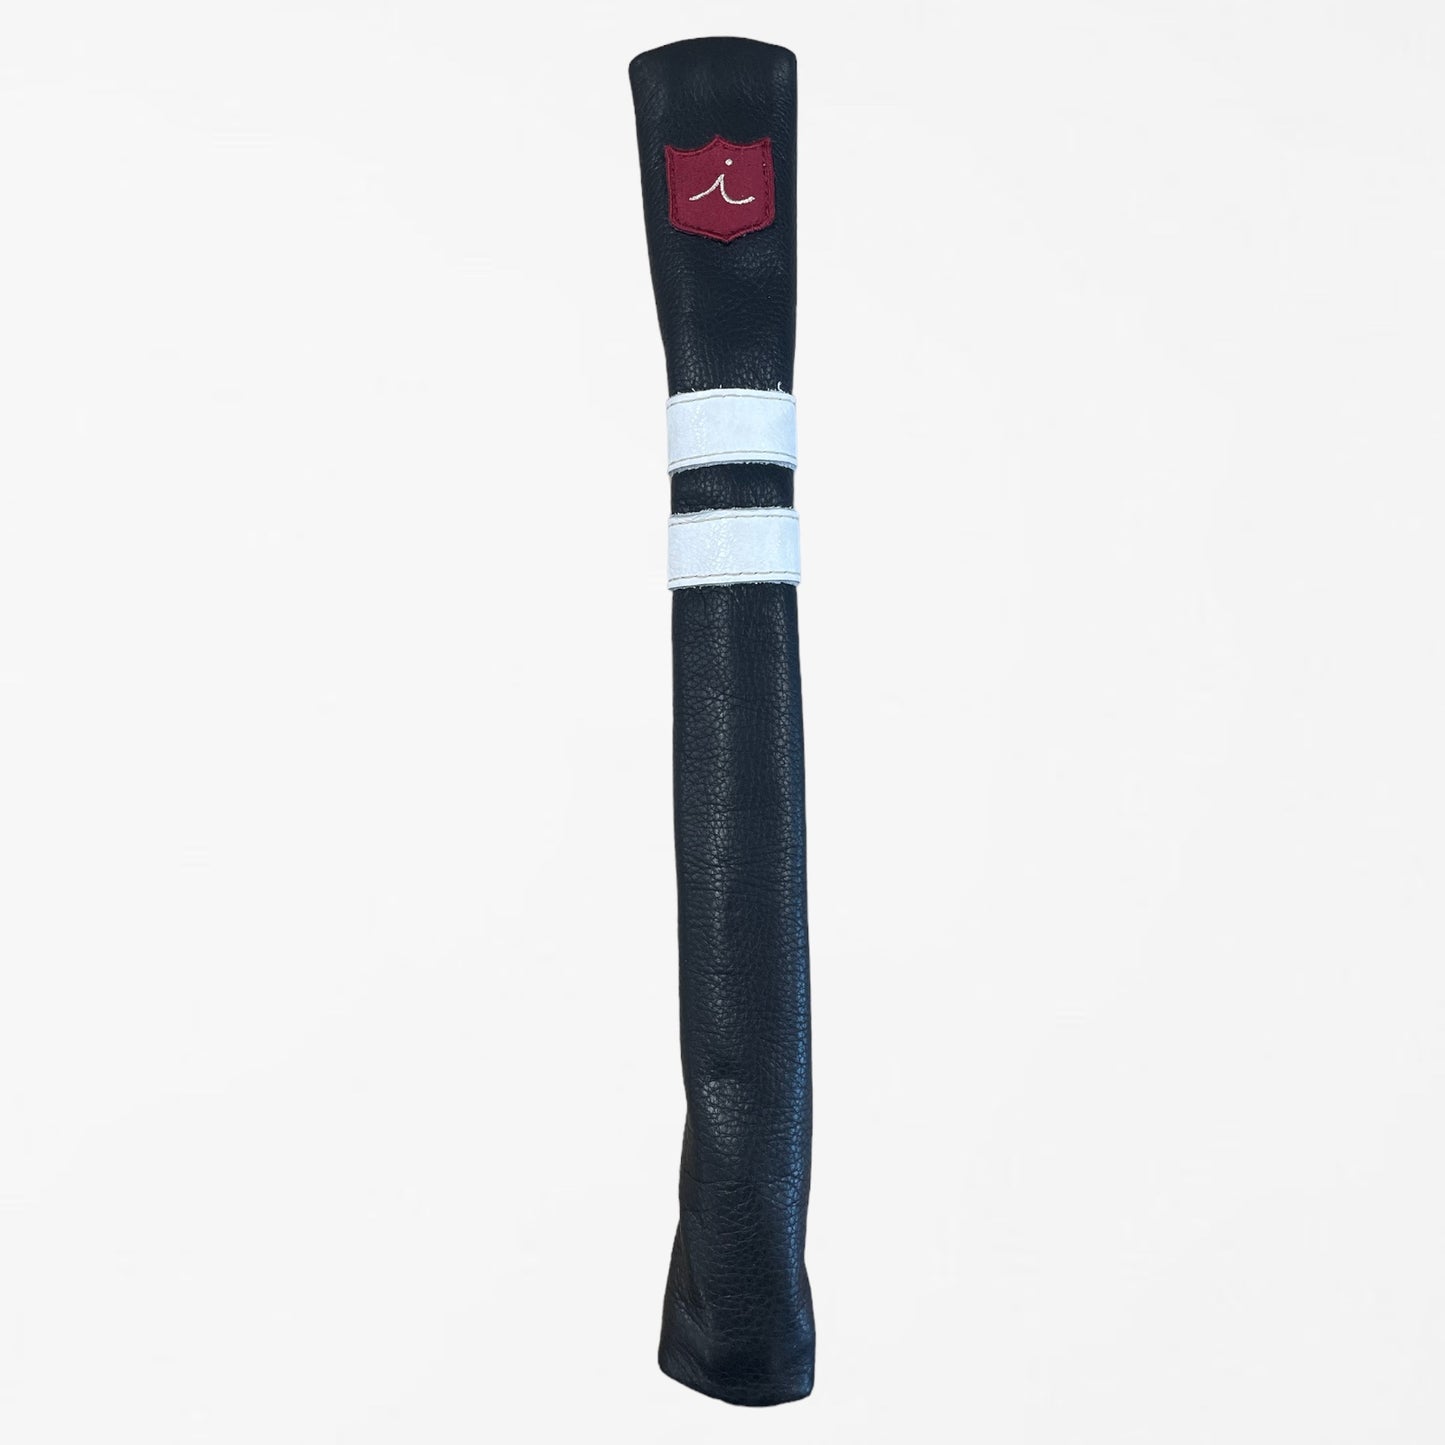 Pinseeker Alignment Stick: Pitch Black + Pure White